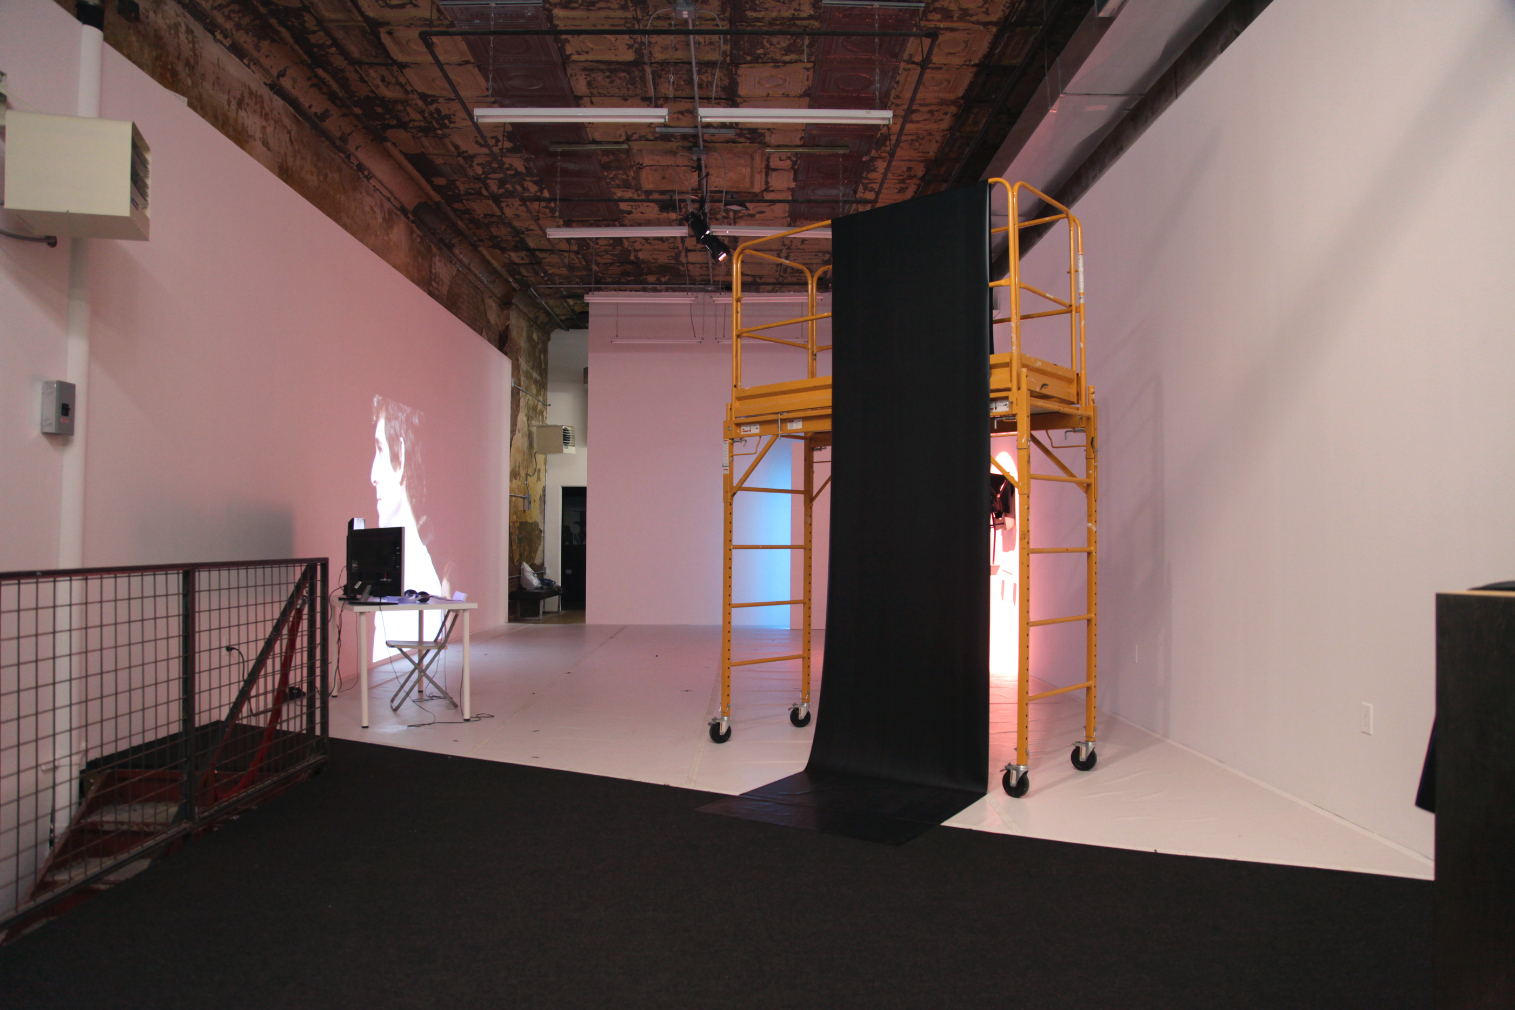 Itziar Barrio, *THE PERILS OF OBEDIENCE*. Installation view